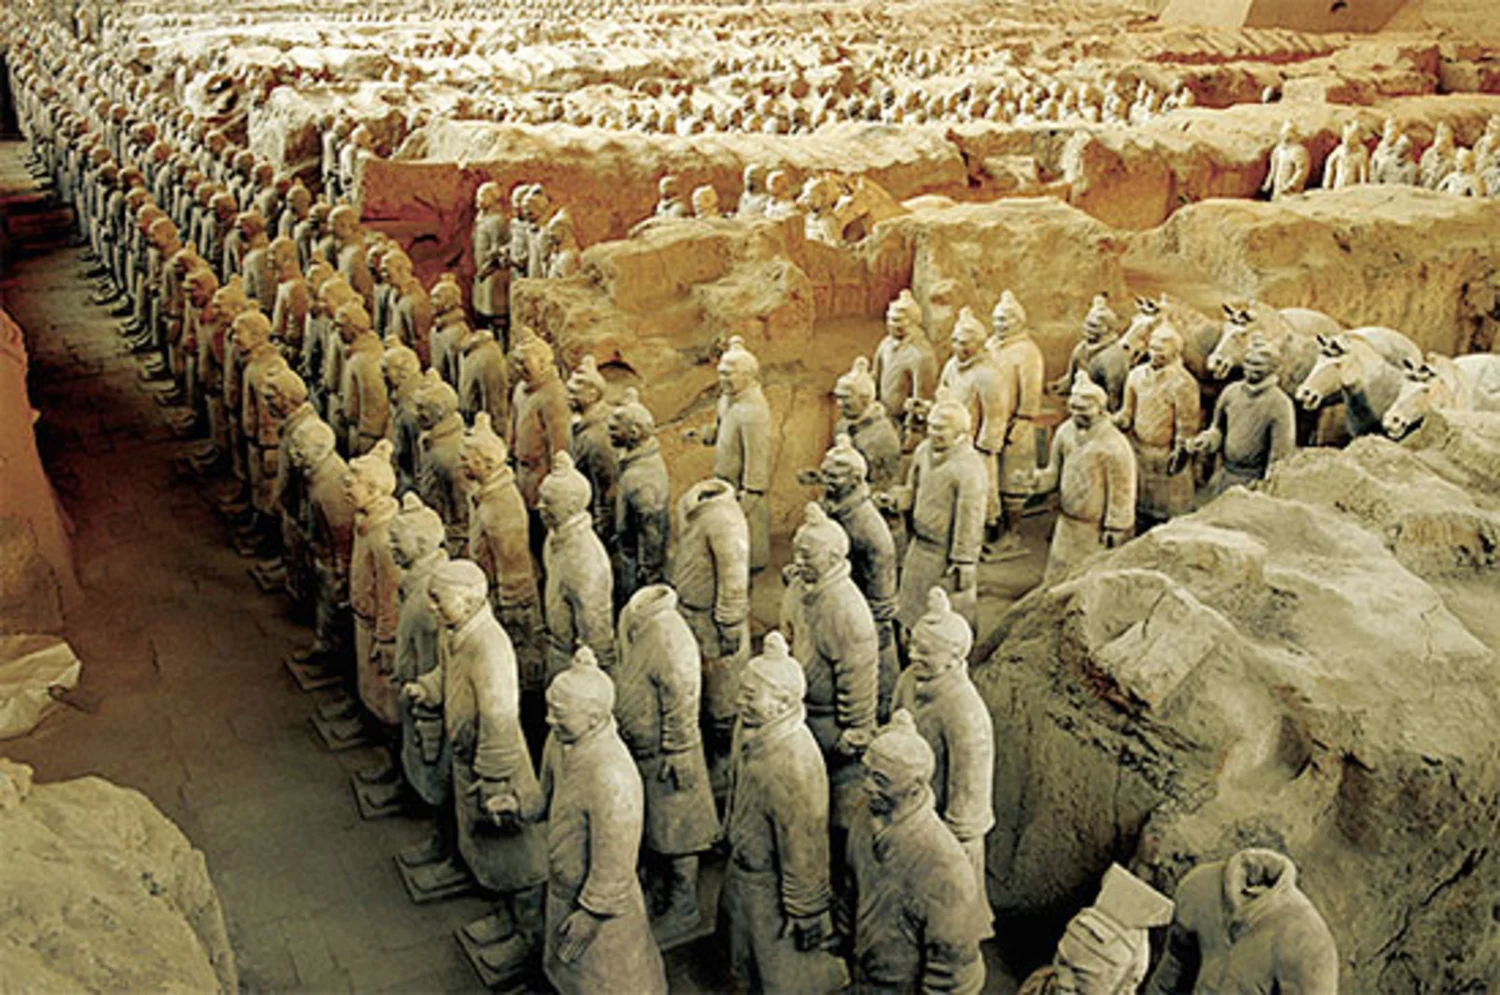 Tomb of ancient emperor found in China’s Shaanxi